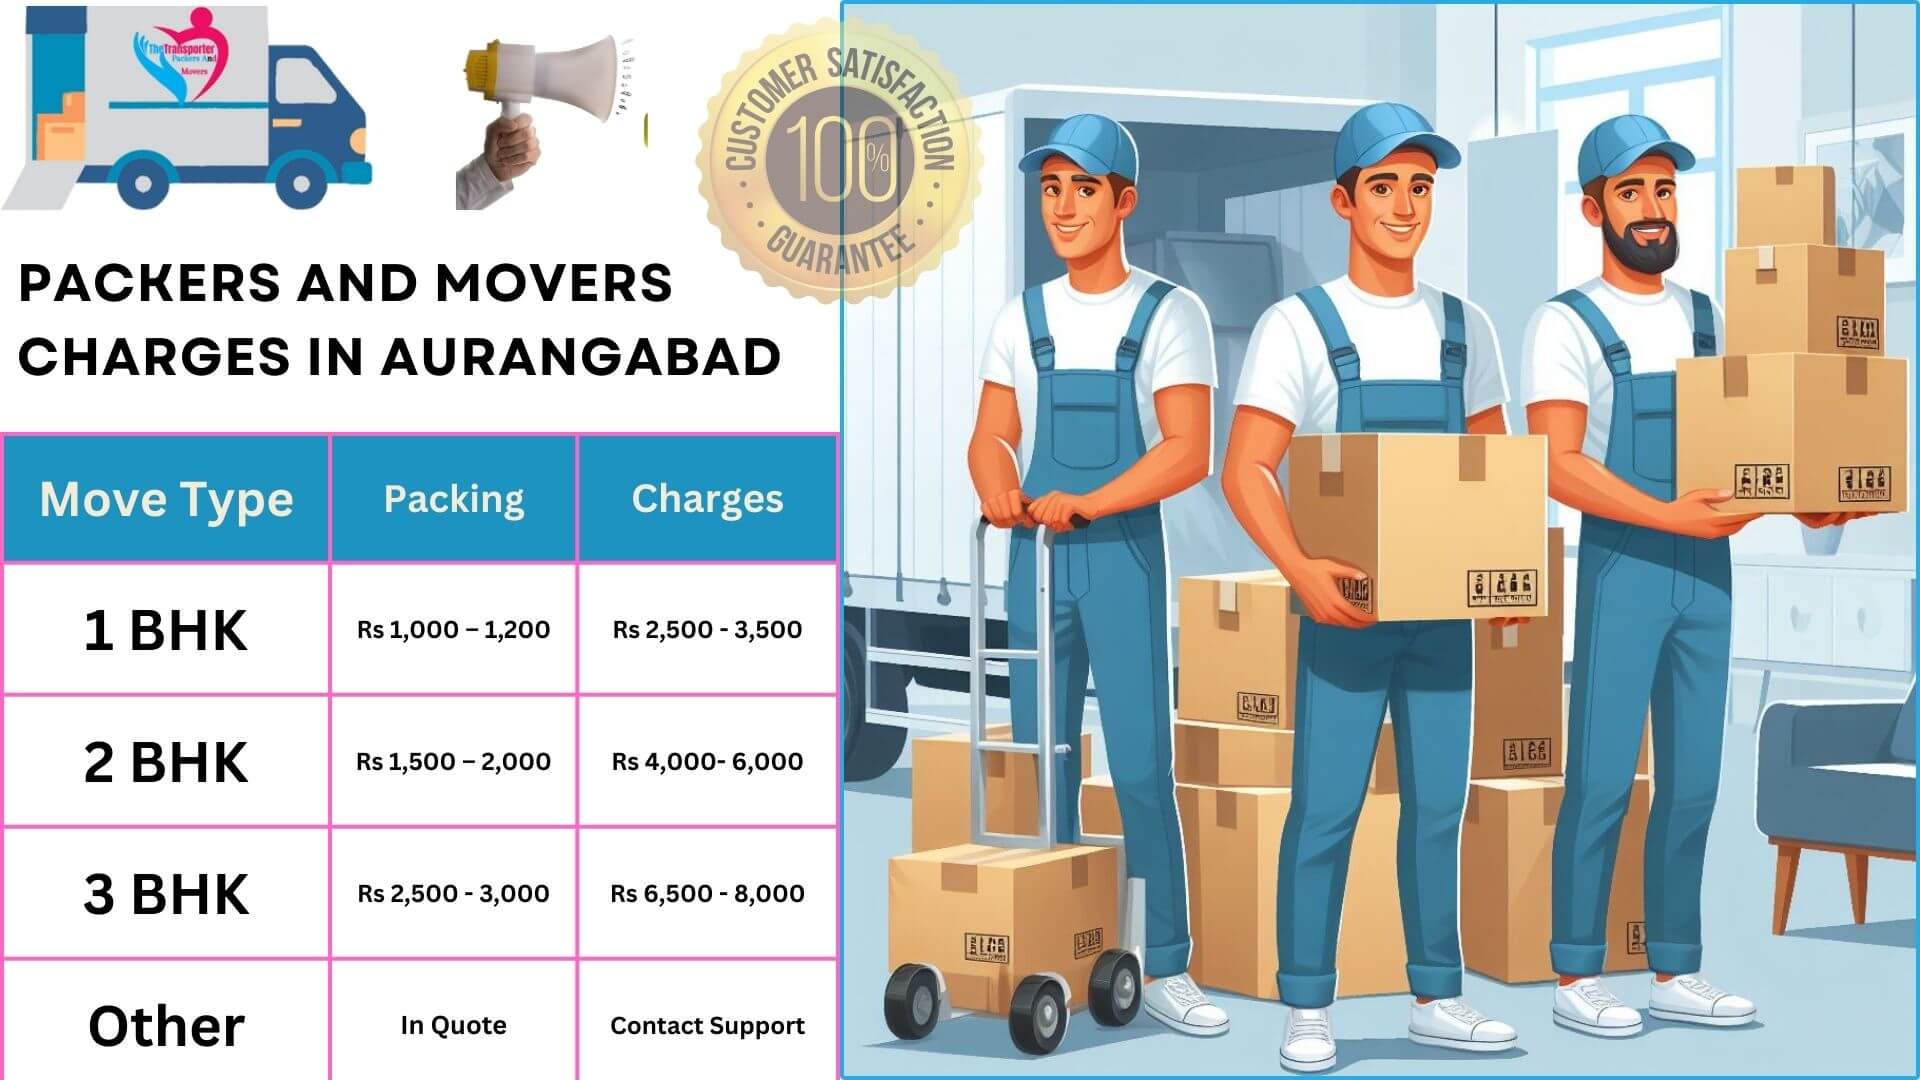 TheTransporter Packers and movers Charges list in Aurangabad 